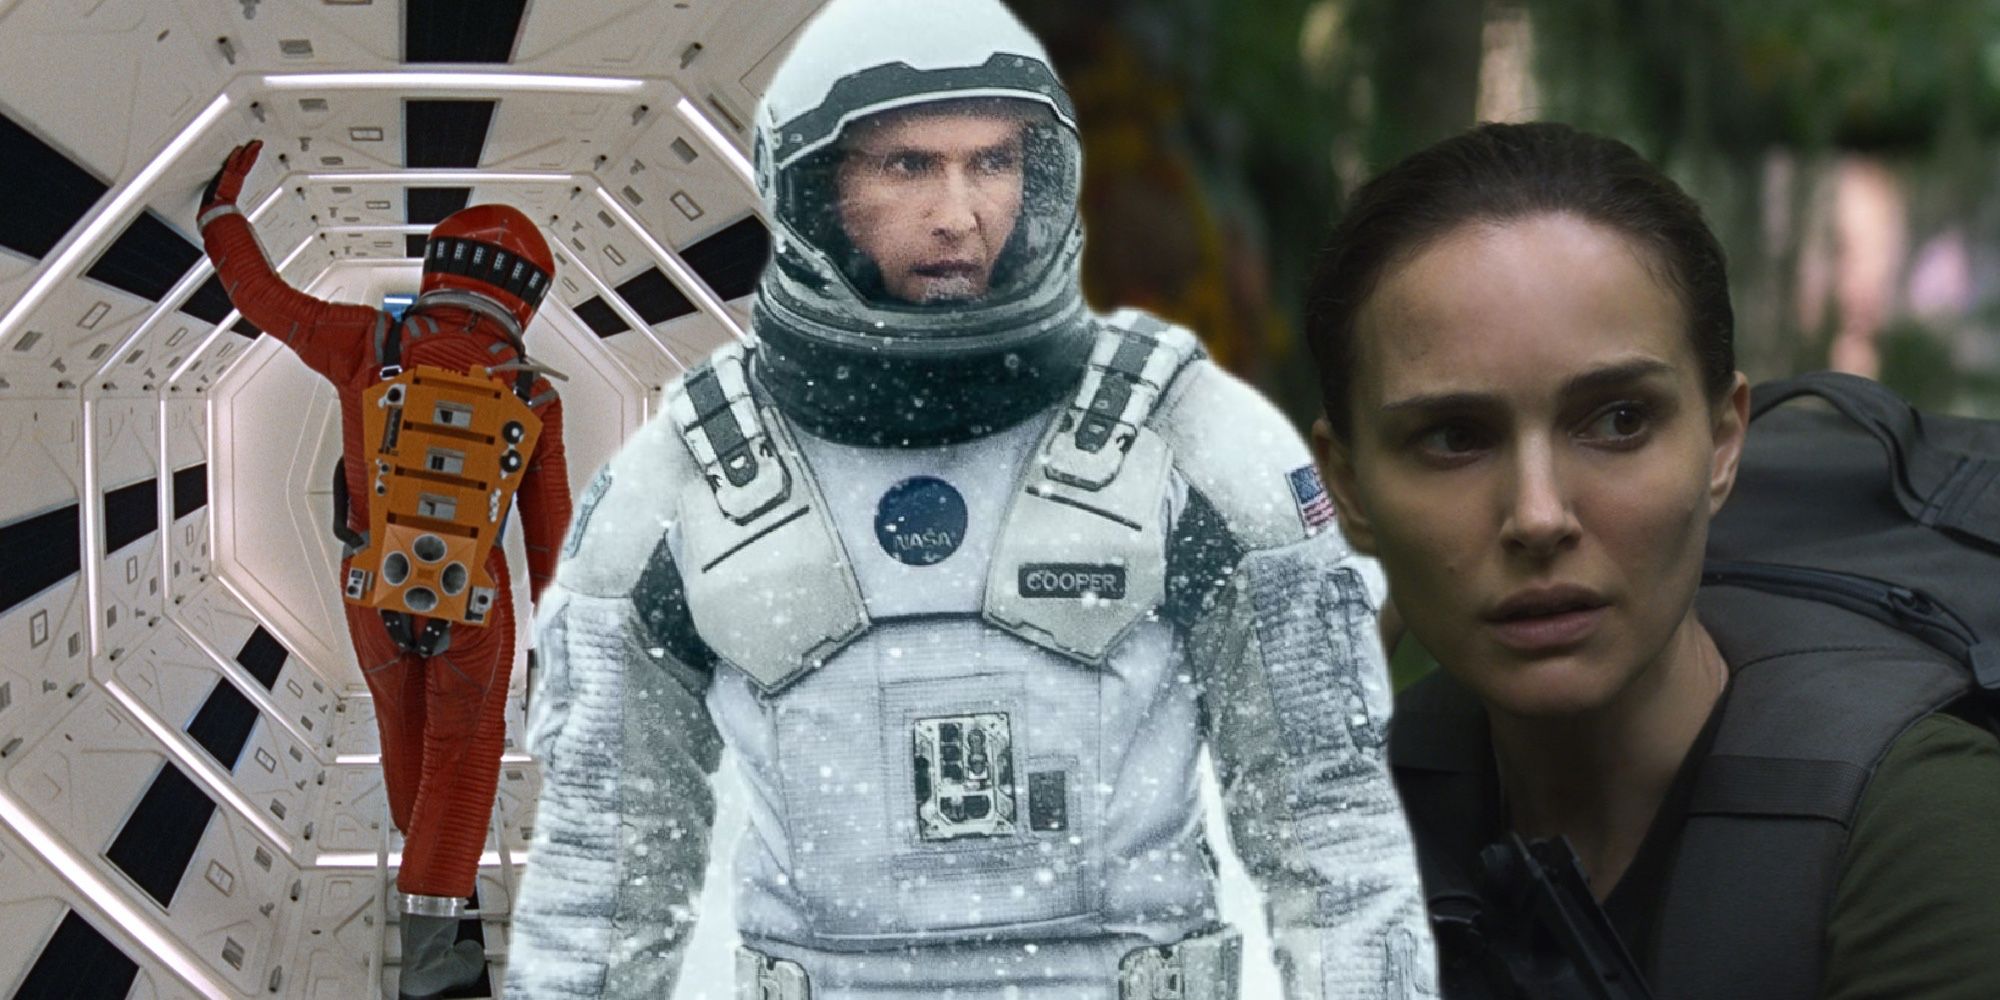 A composite image of Interstellar and similar movies